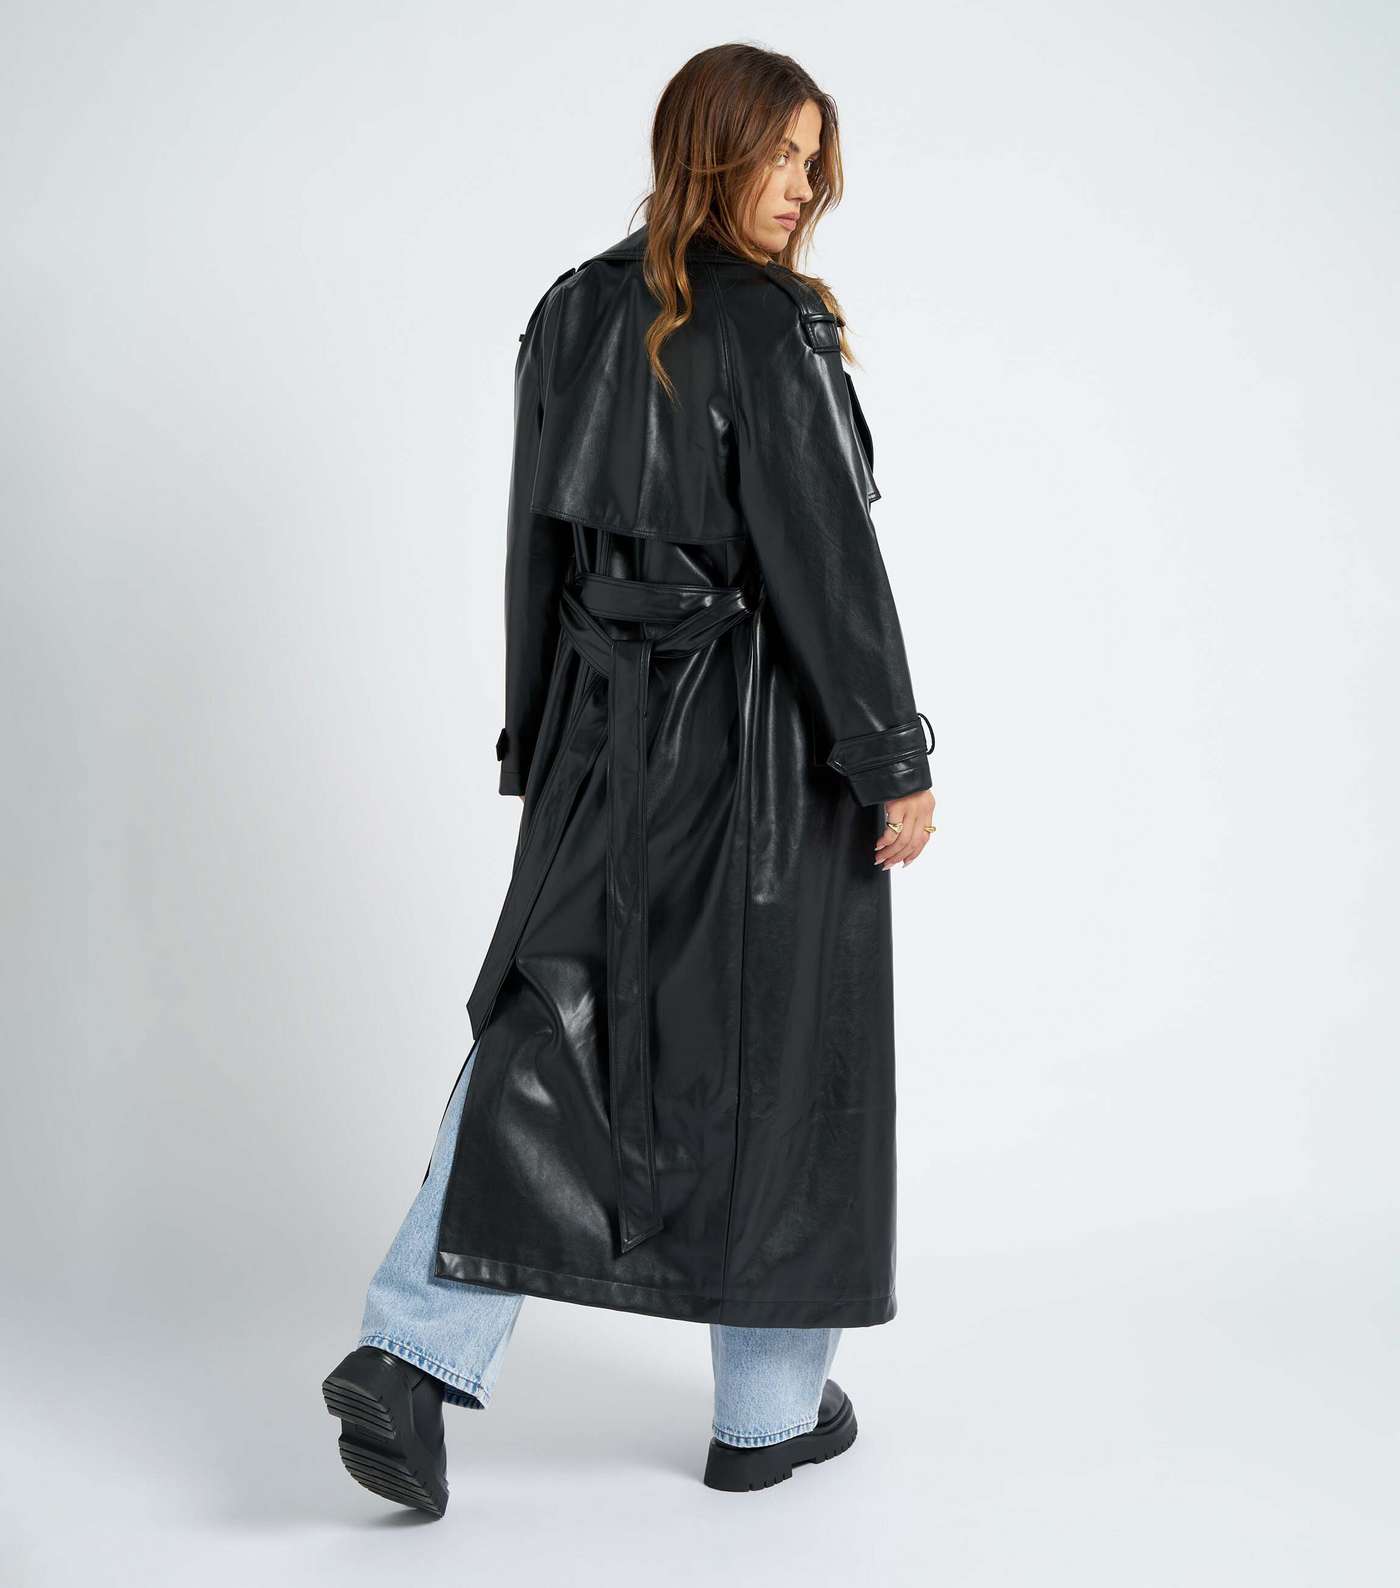 Urban Bliss Black Leather-Look Belted Trench Coat Image 4